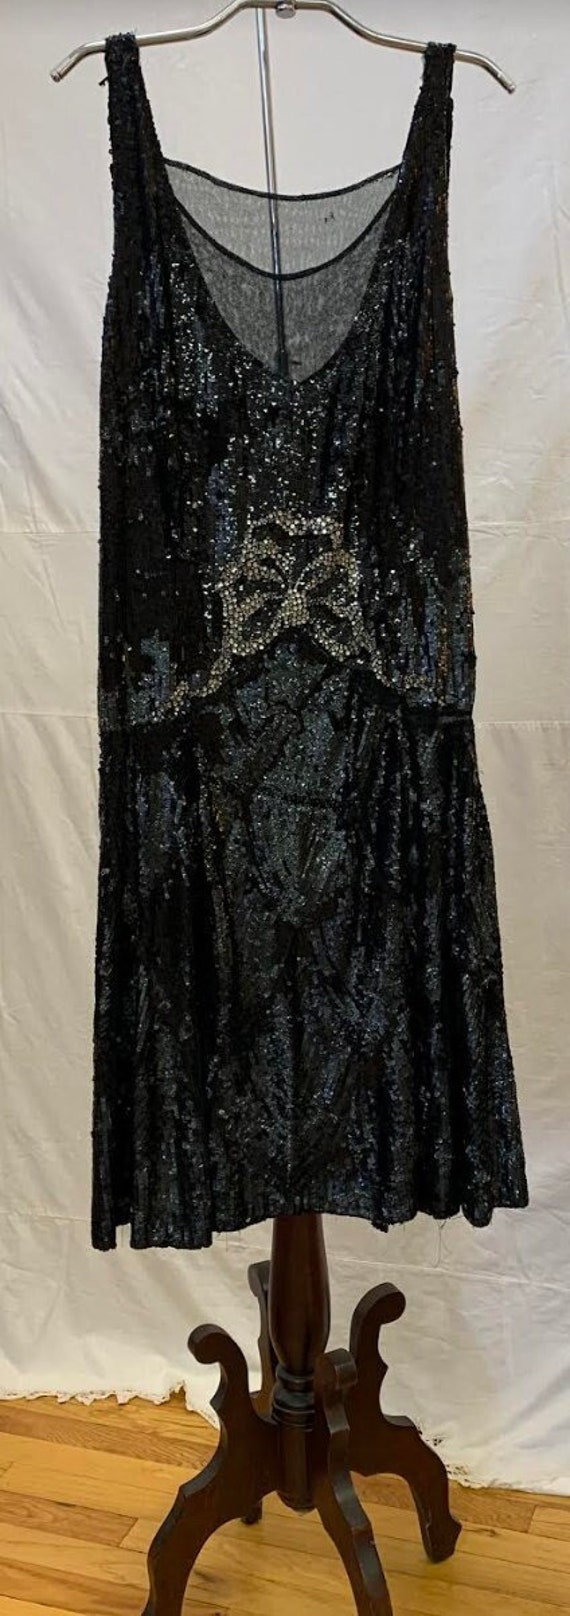 1920s, 34" bust, black sequined gown